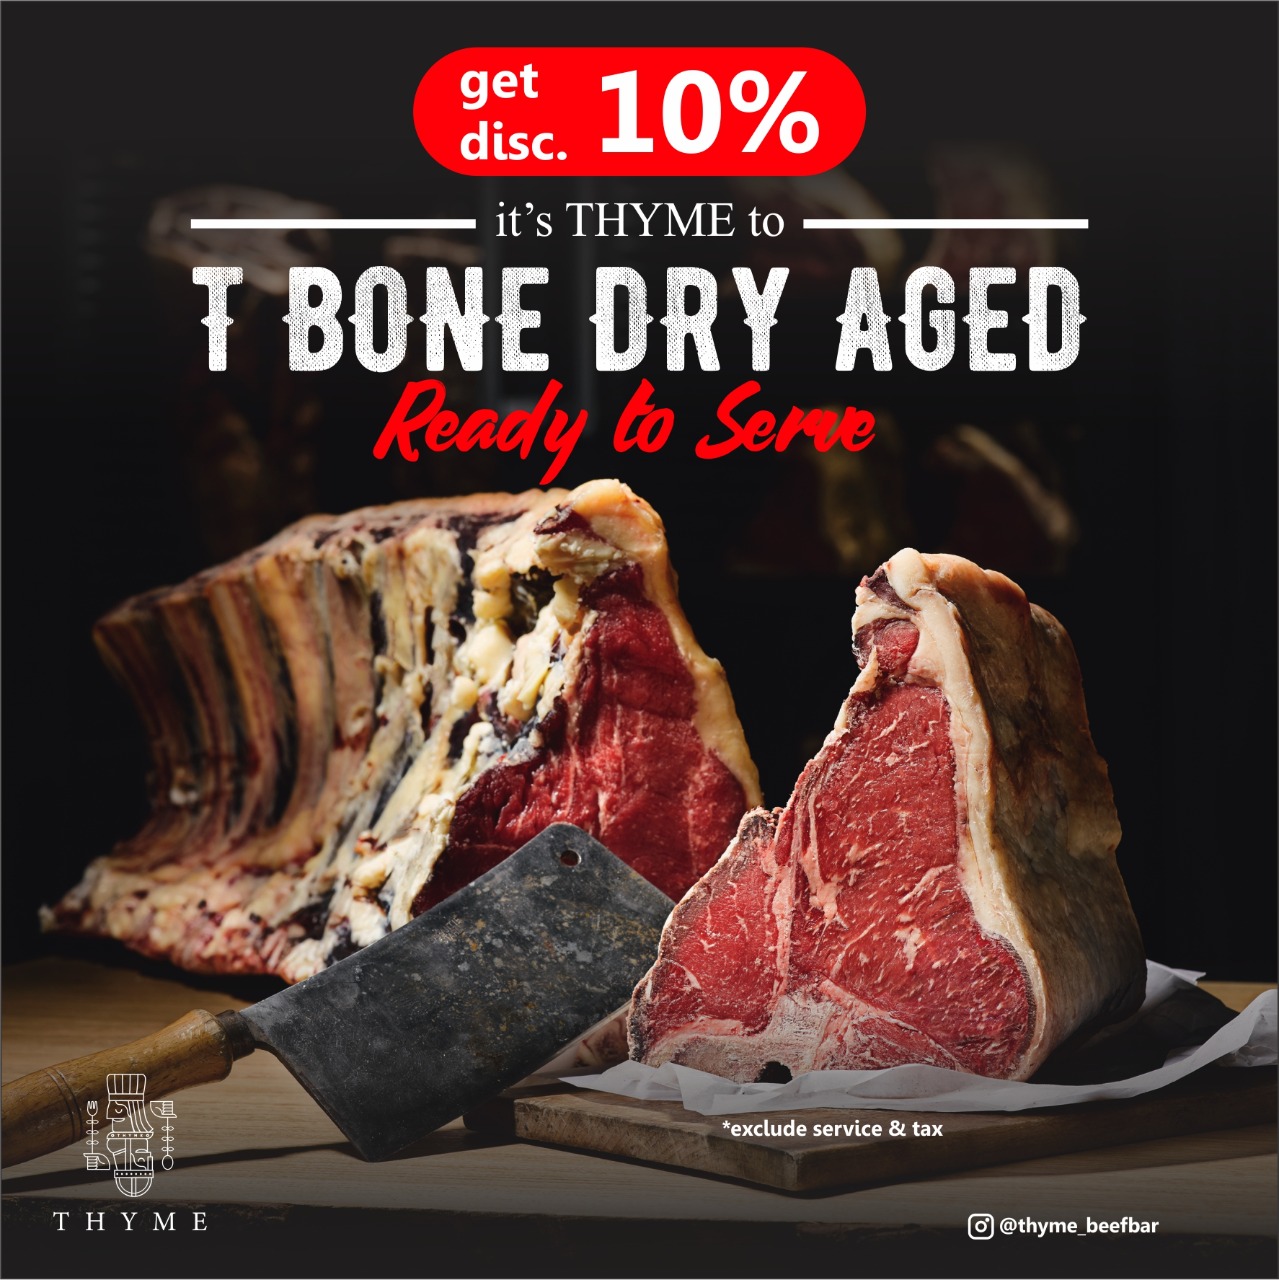 Promo Discount 10% T-BONE Dry Aged at Thyme Beefbar Eatery